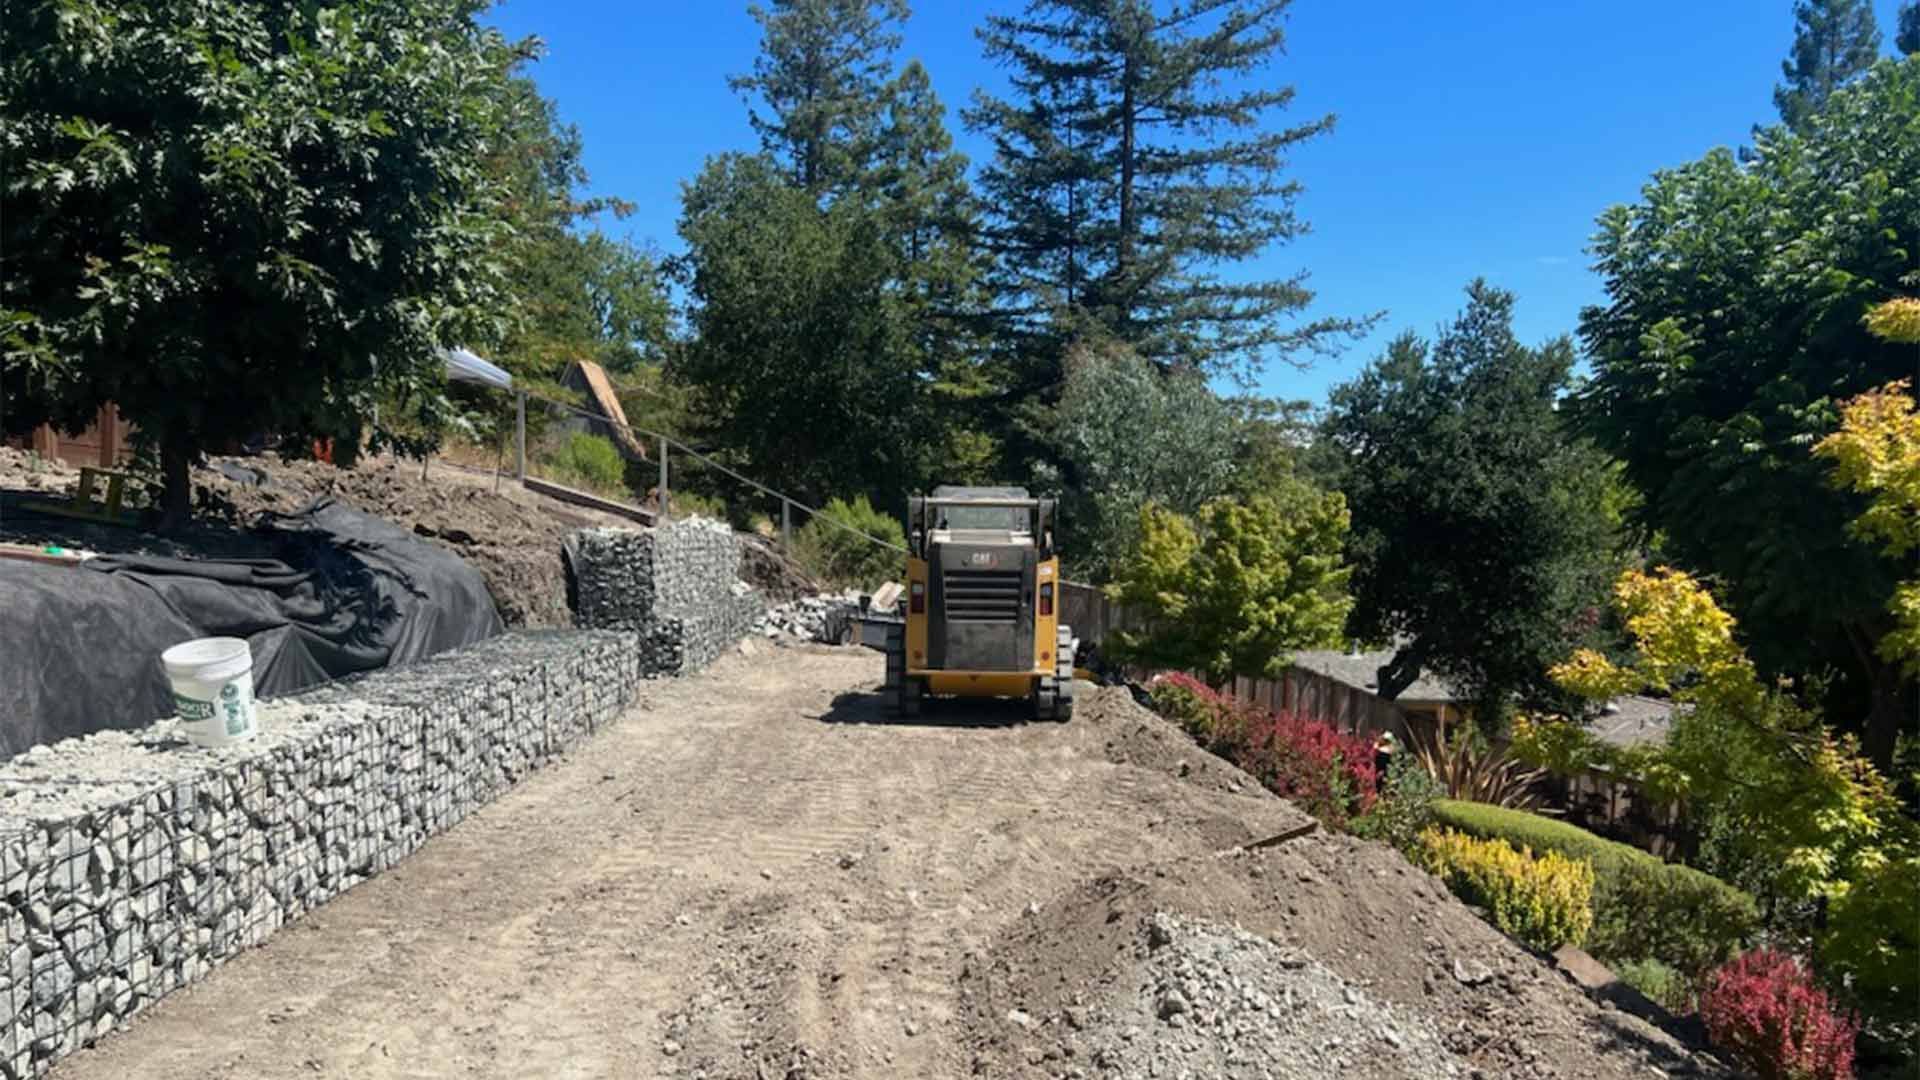 A bulldozer is driving down a dirt road next to a stone wall.